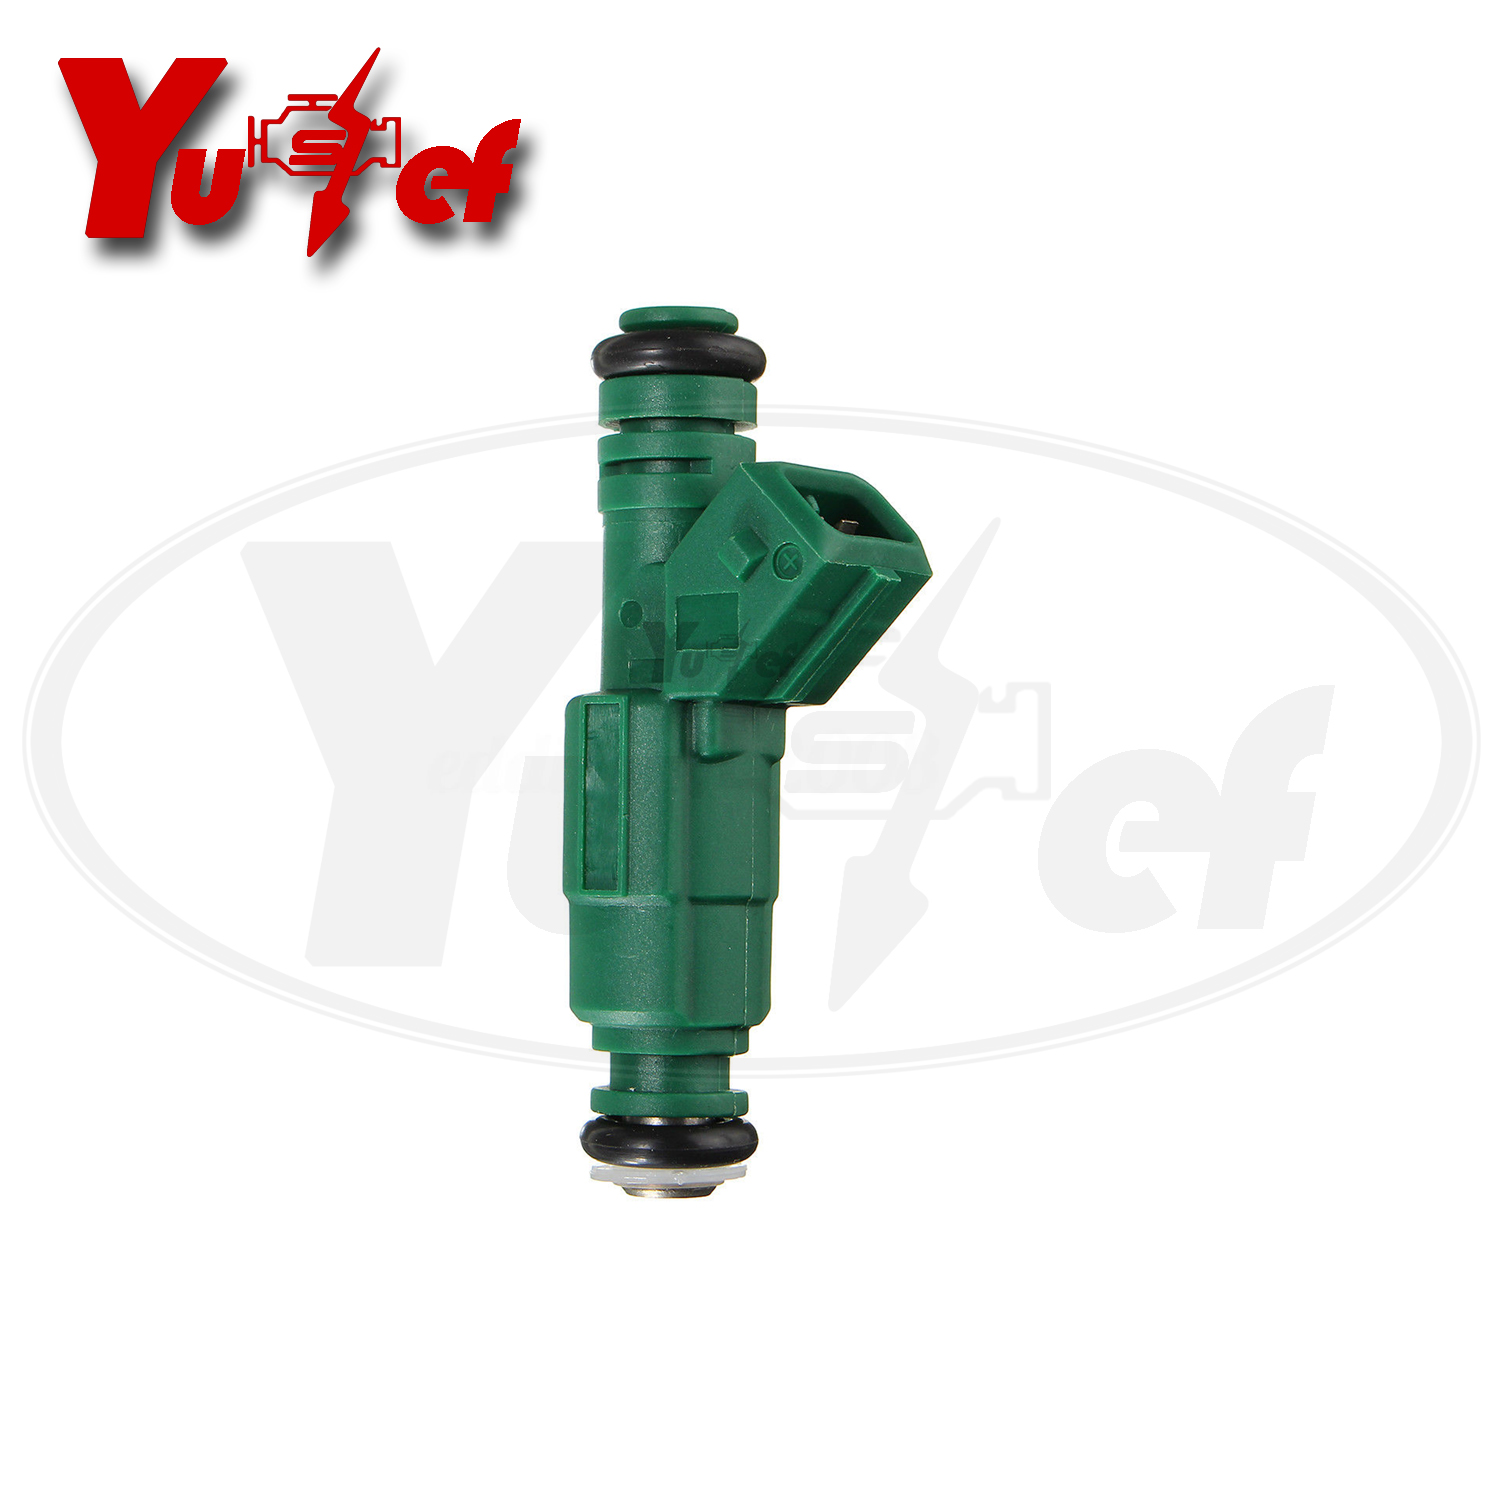 high quality fuel injector nozzle fit for C70 S60 S70 V70 0280155968 9202100